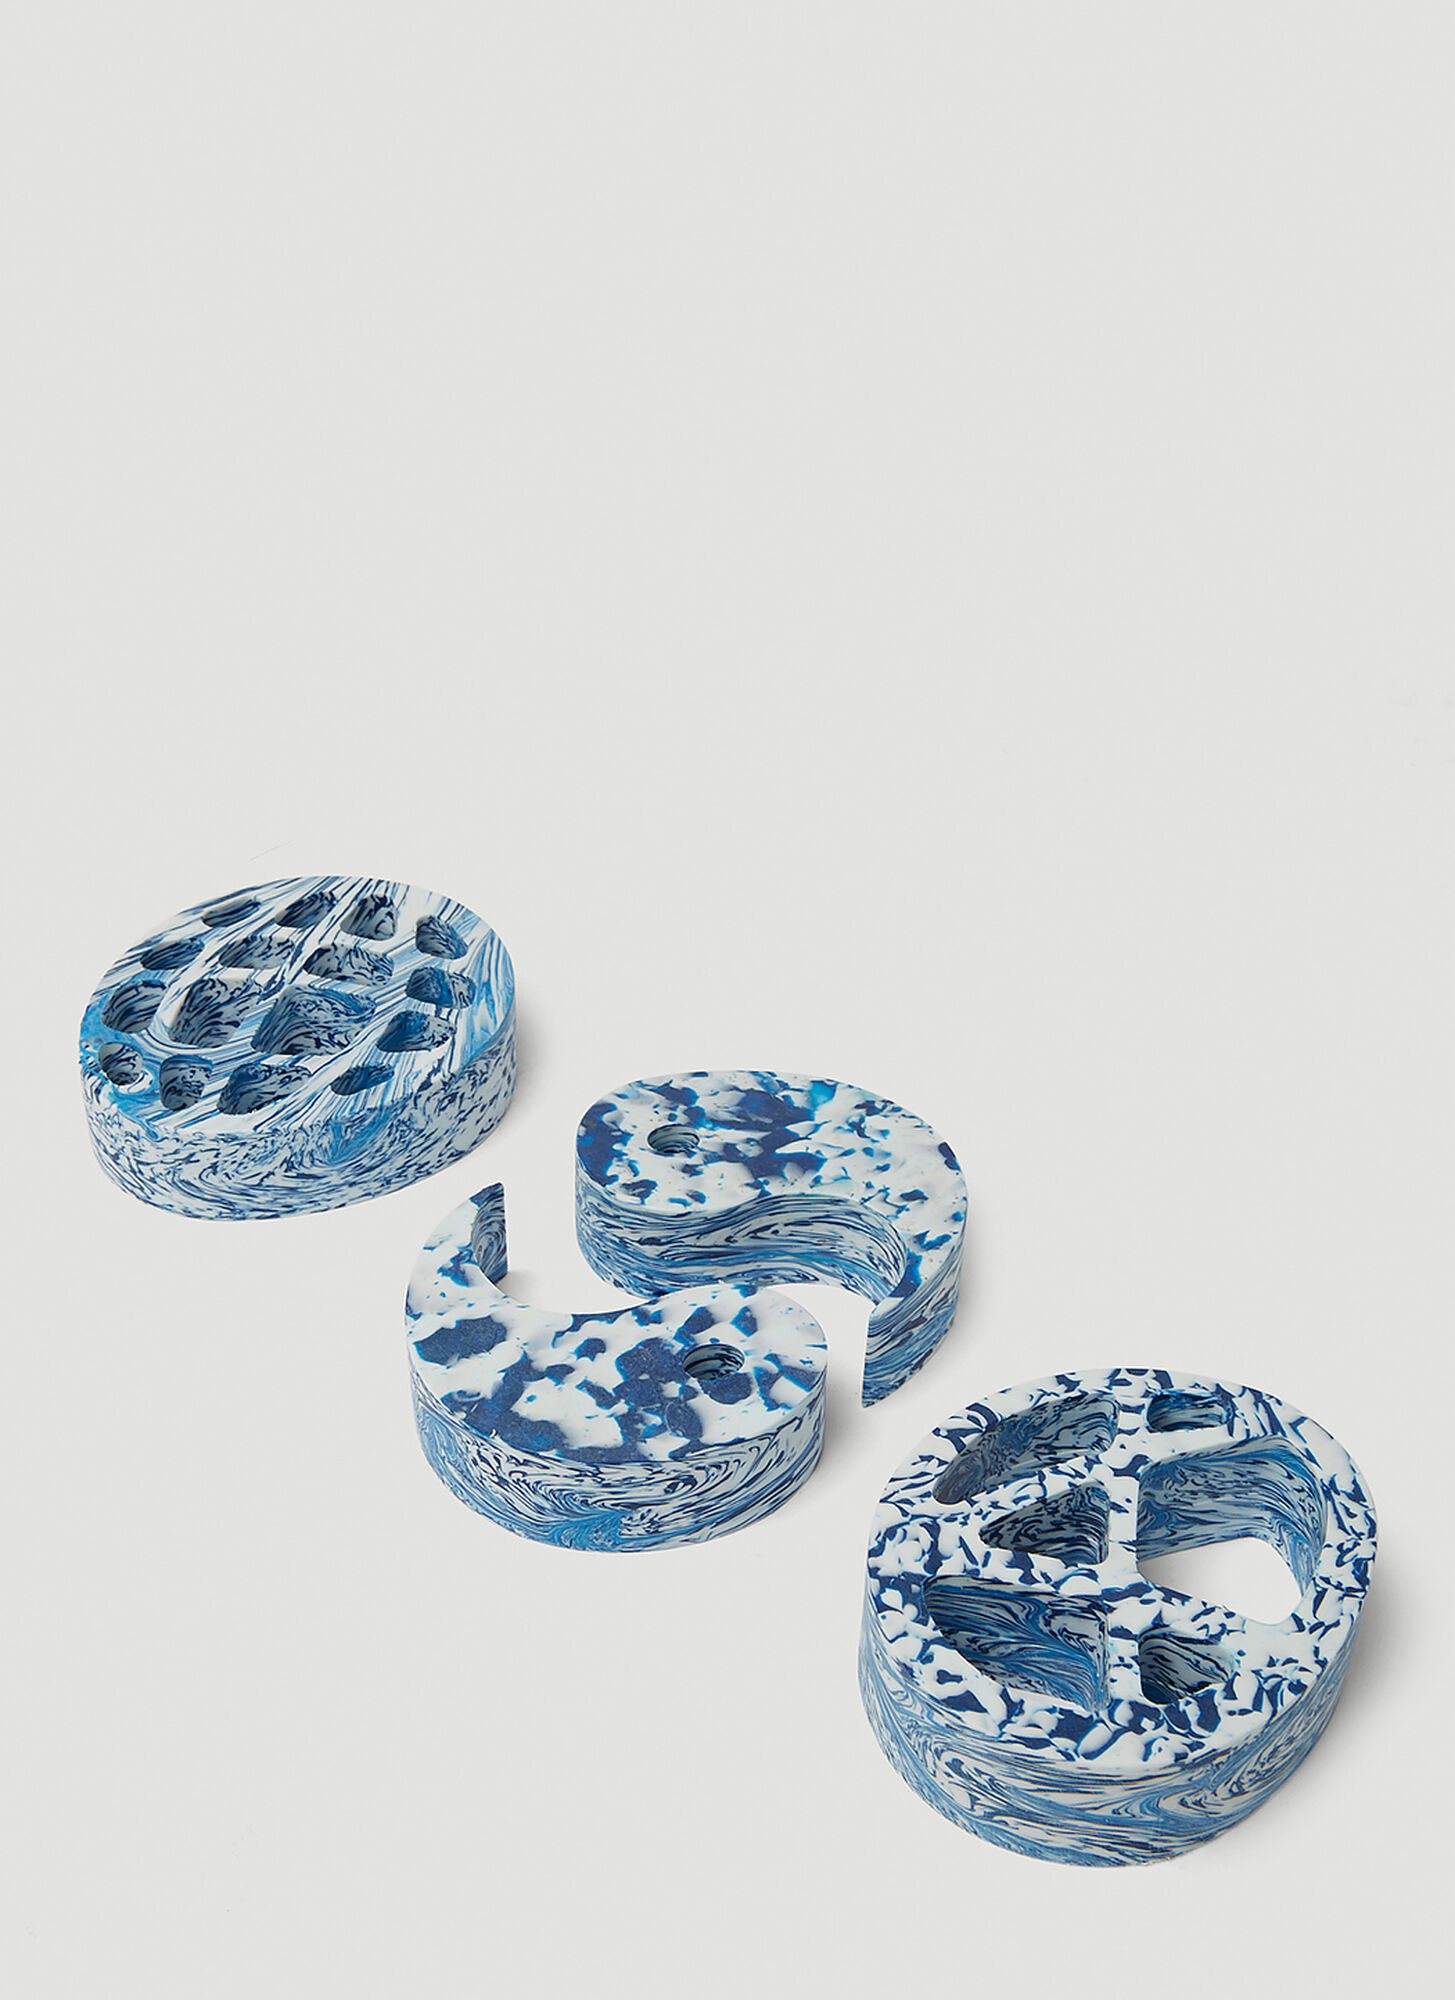 Space Available Symbolism Paper Weights In Blue